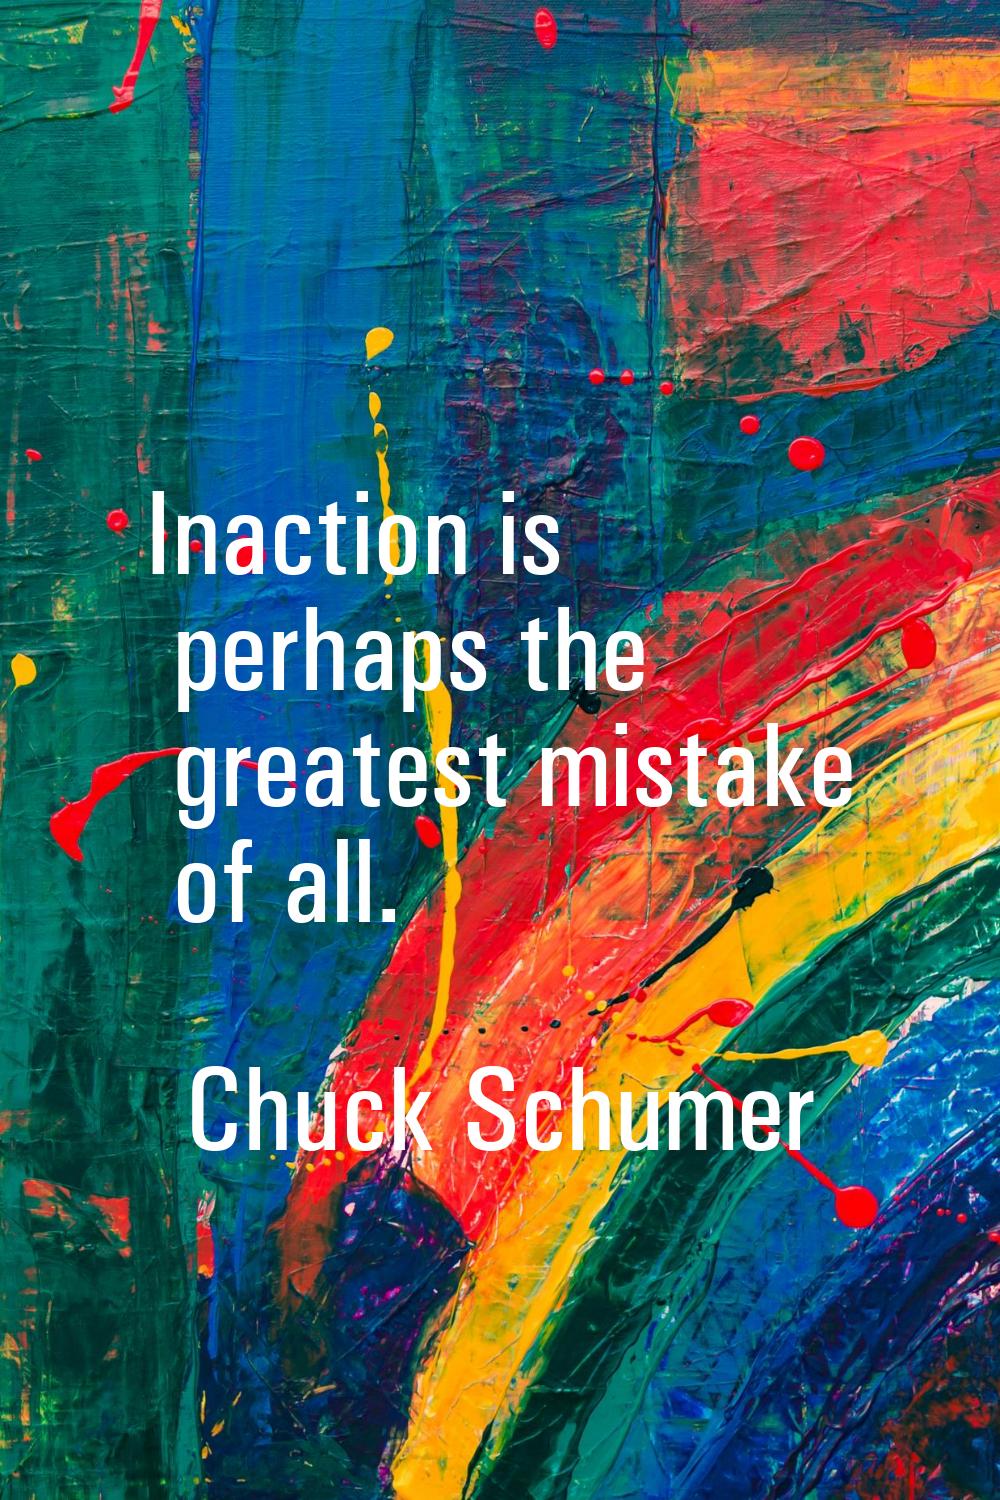 Inaction is perhaps the greatest mistake of all.